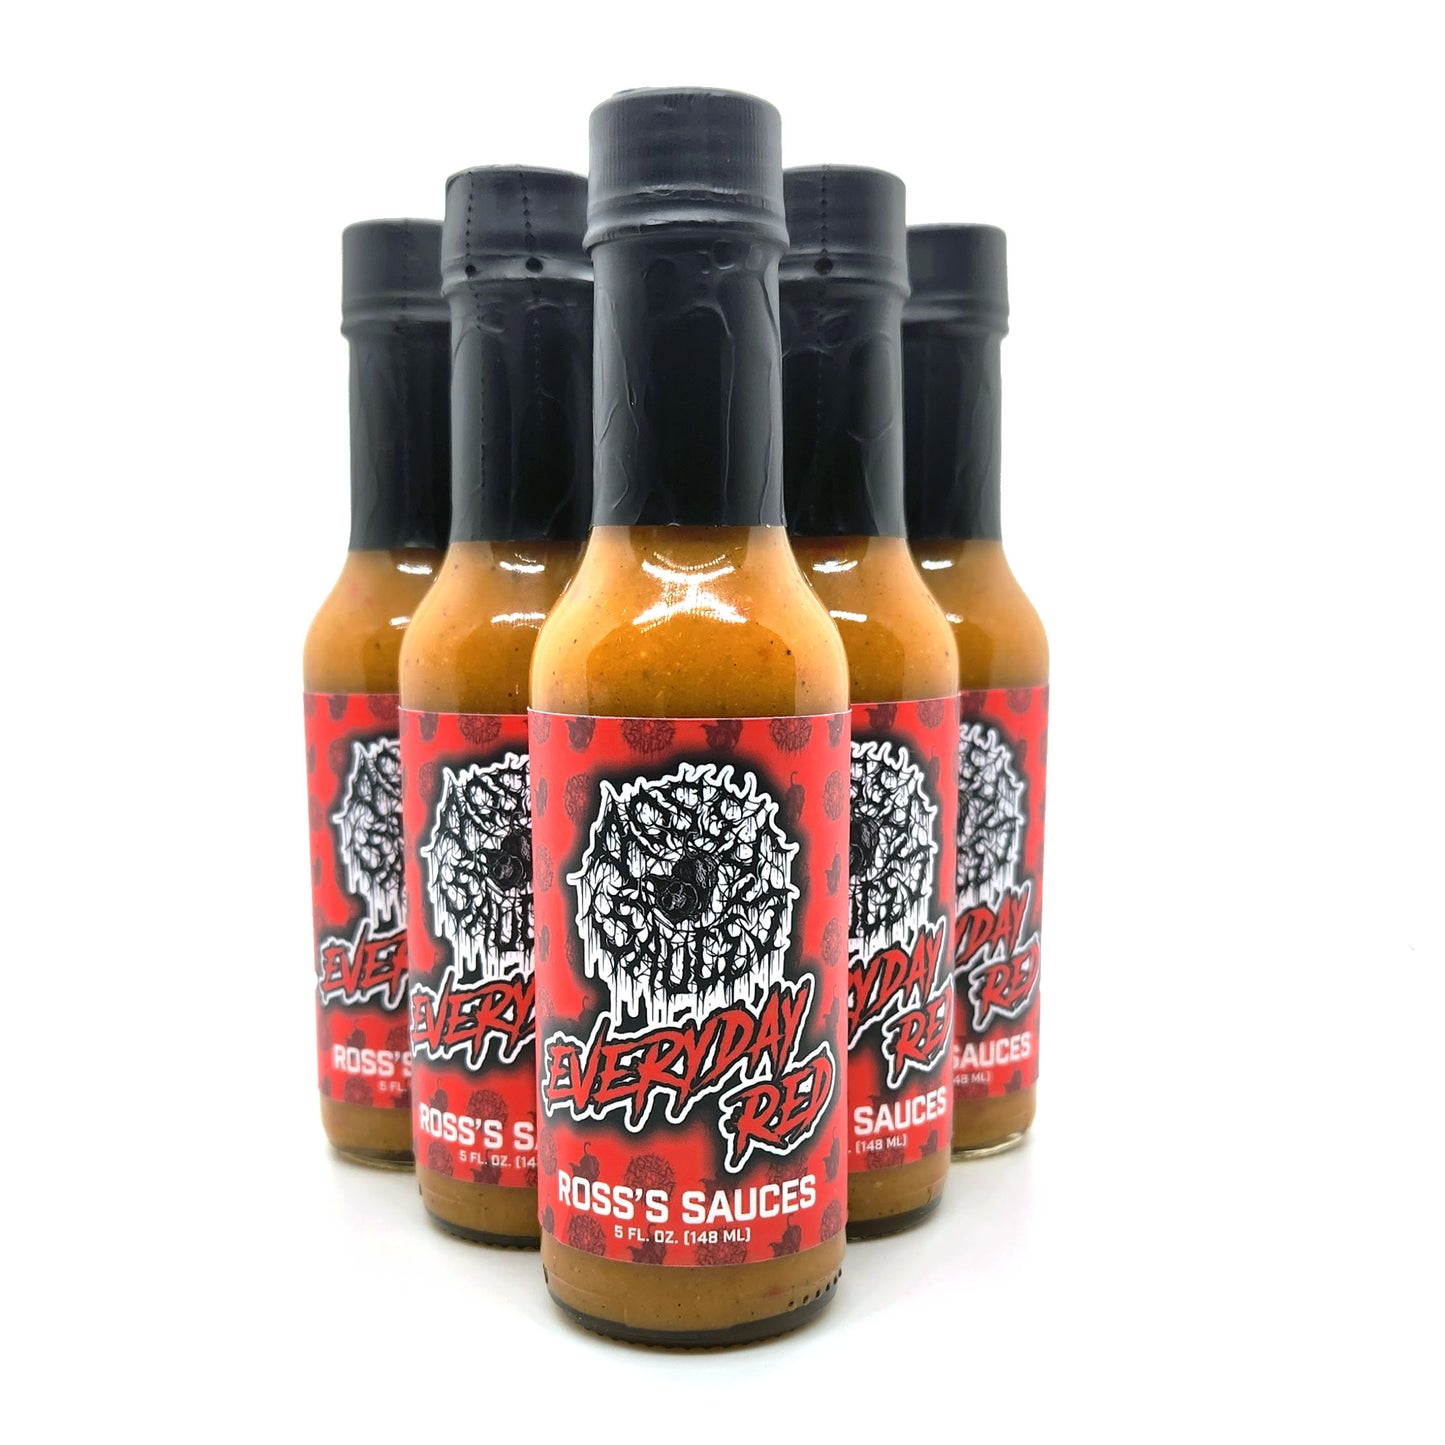 Everyday Red Hot Sauce